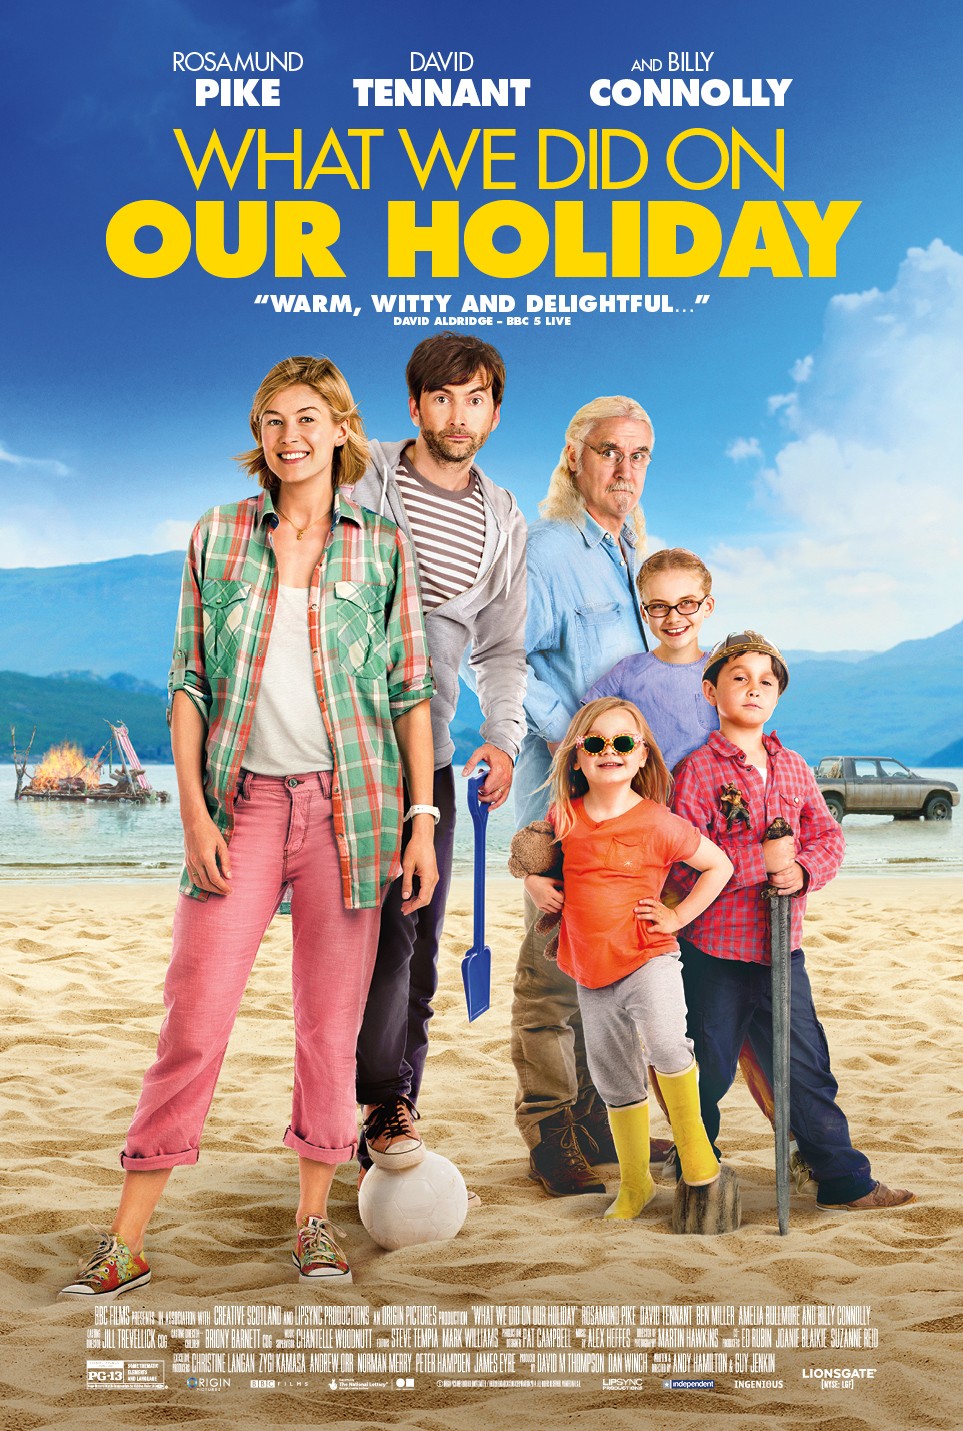 What We Did on Our Holiday DVD Release Date | Redbox, Netflix, iTunes